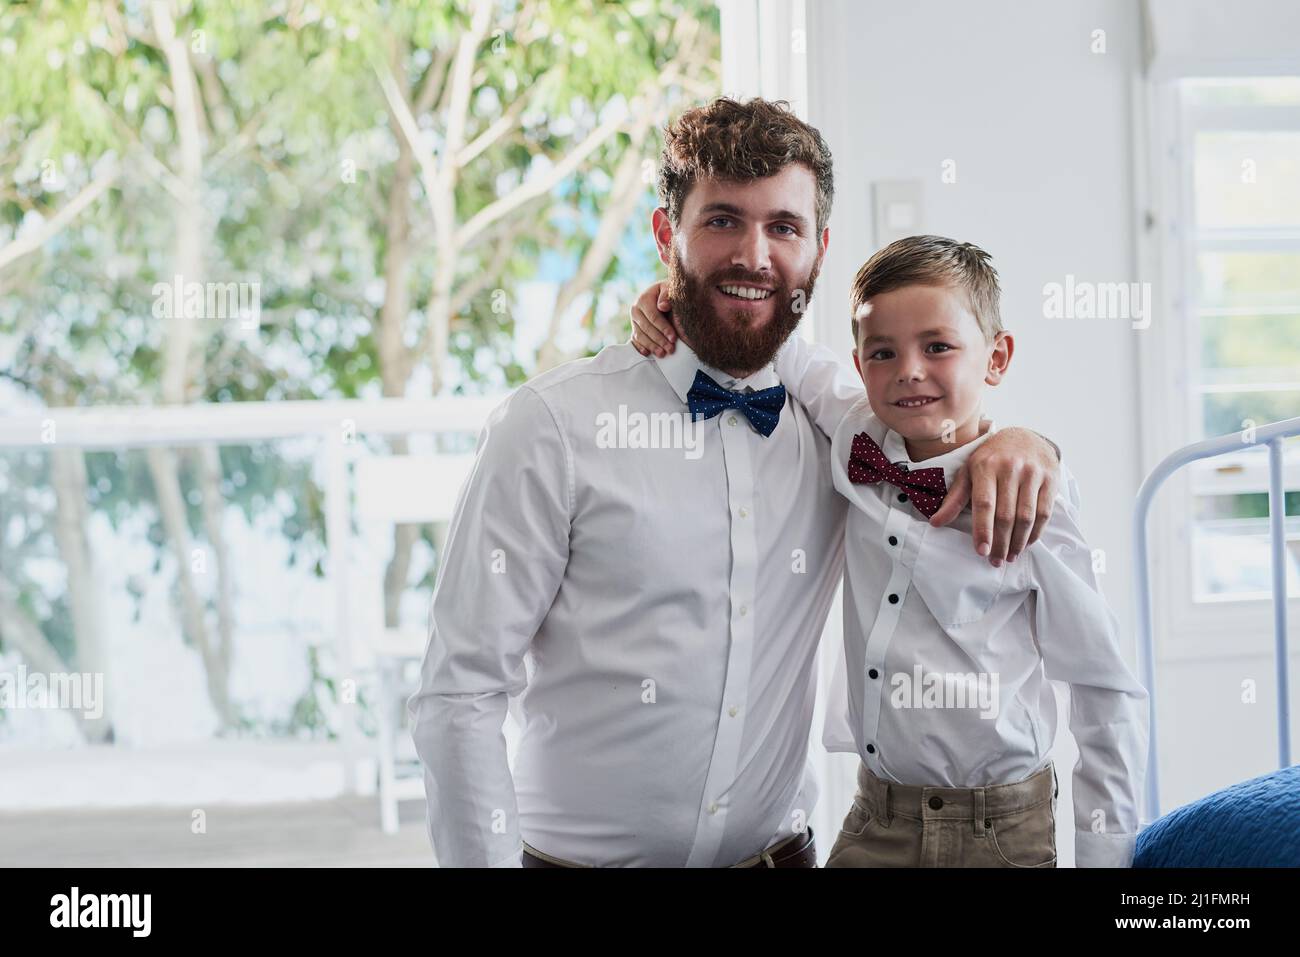 Looking dapper with Daddy. Portrait of an adorable little boy and his father dressed in matching outfits at home. Stock Photo